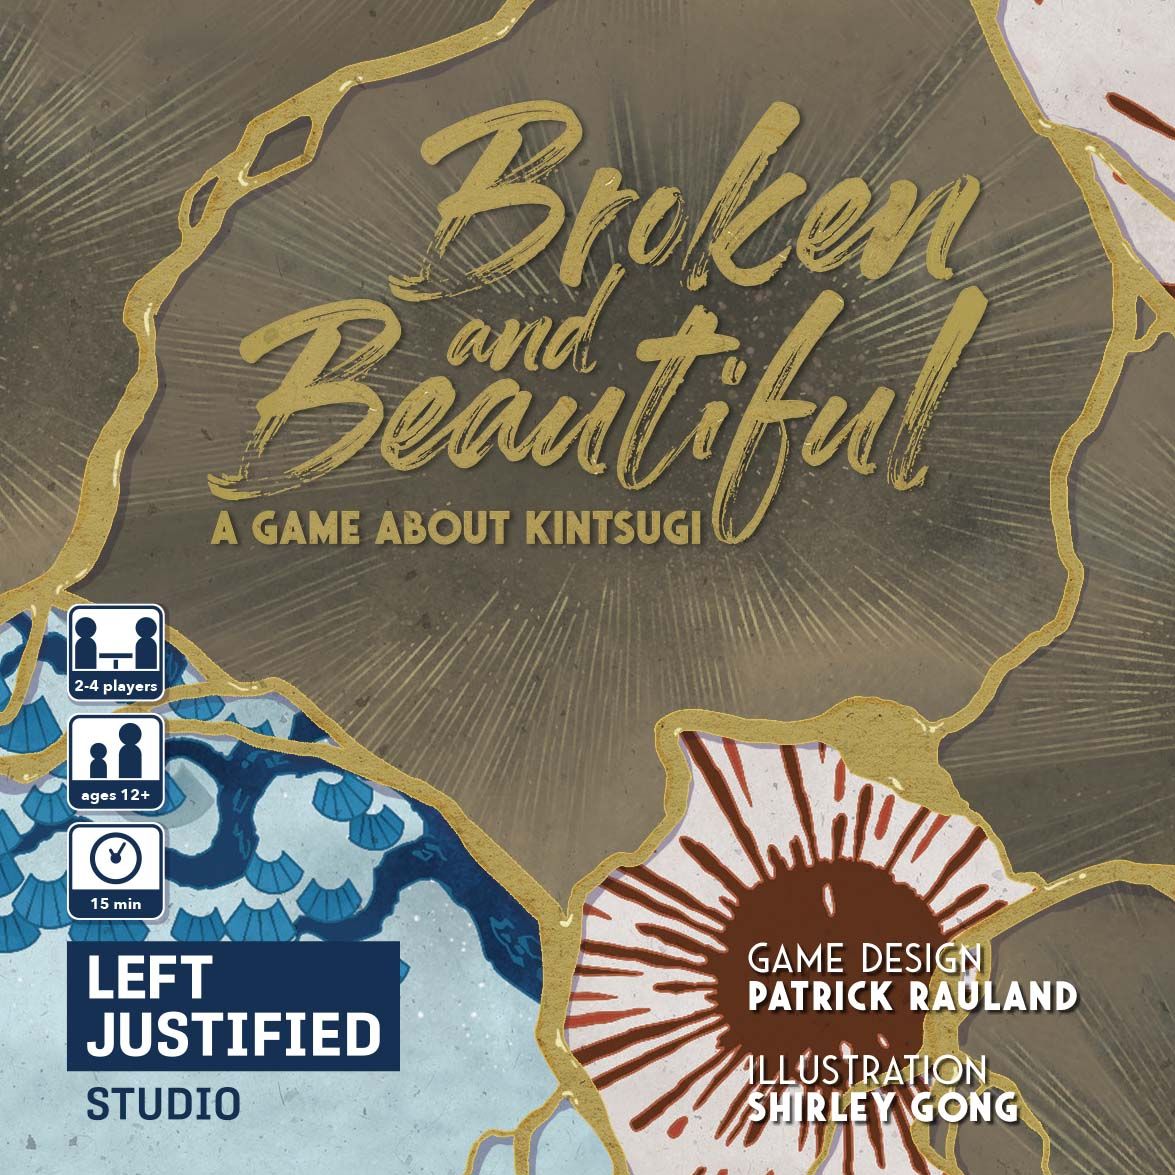 Left Justified Studio Broken and Beautiful: A Game About Kintsugi